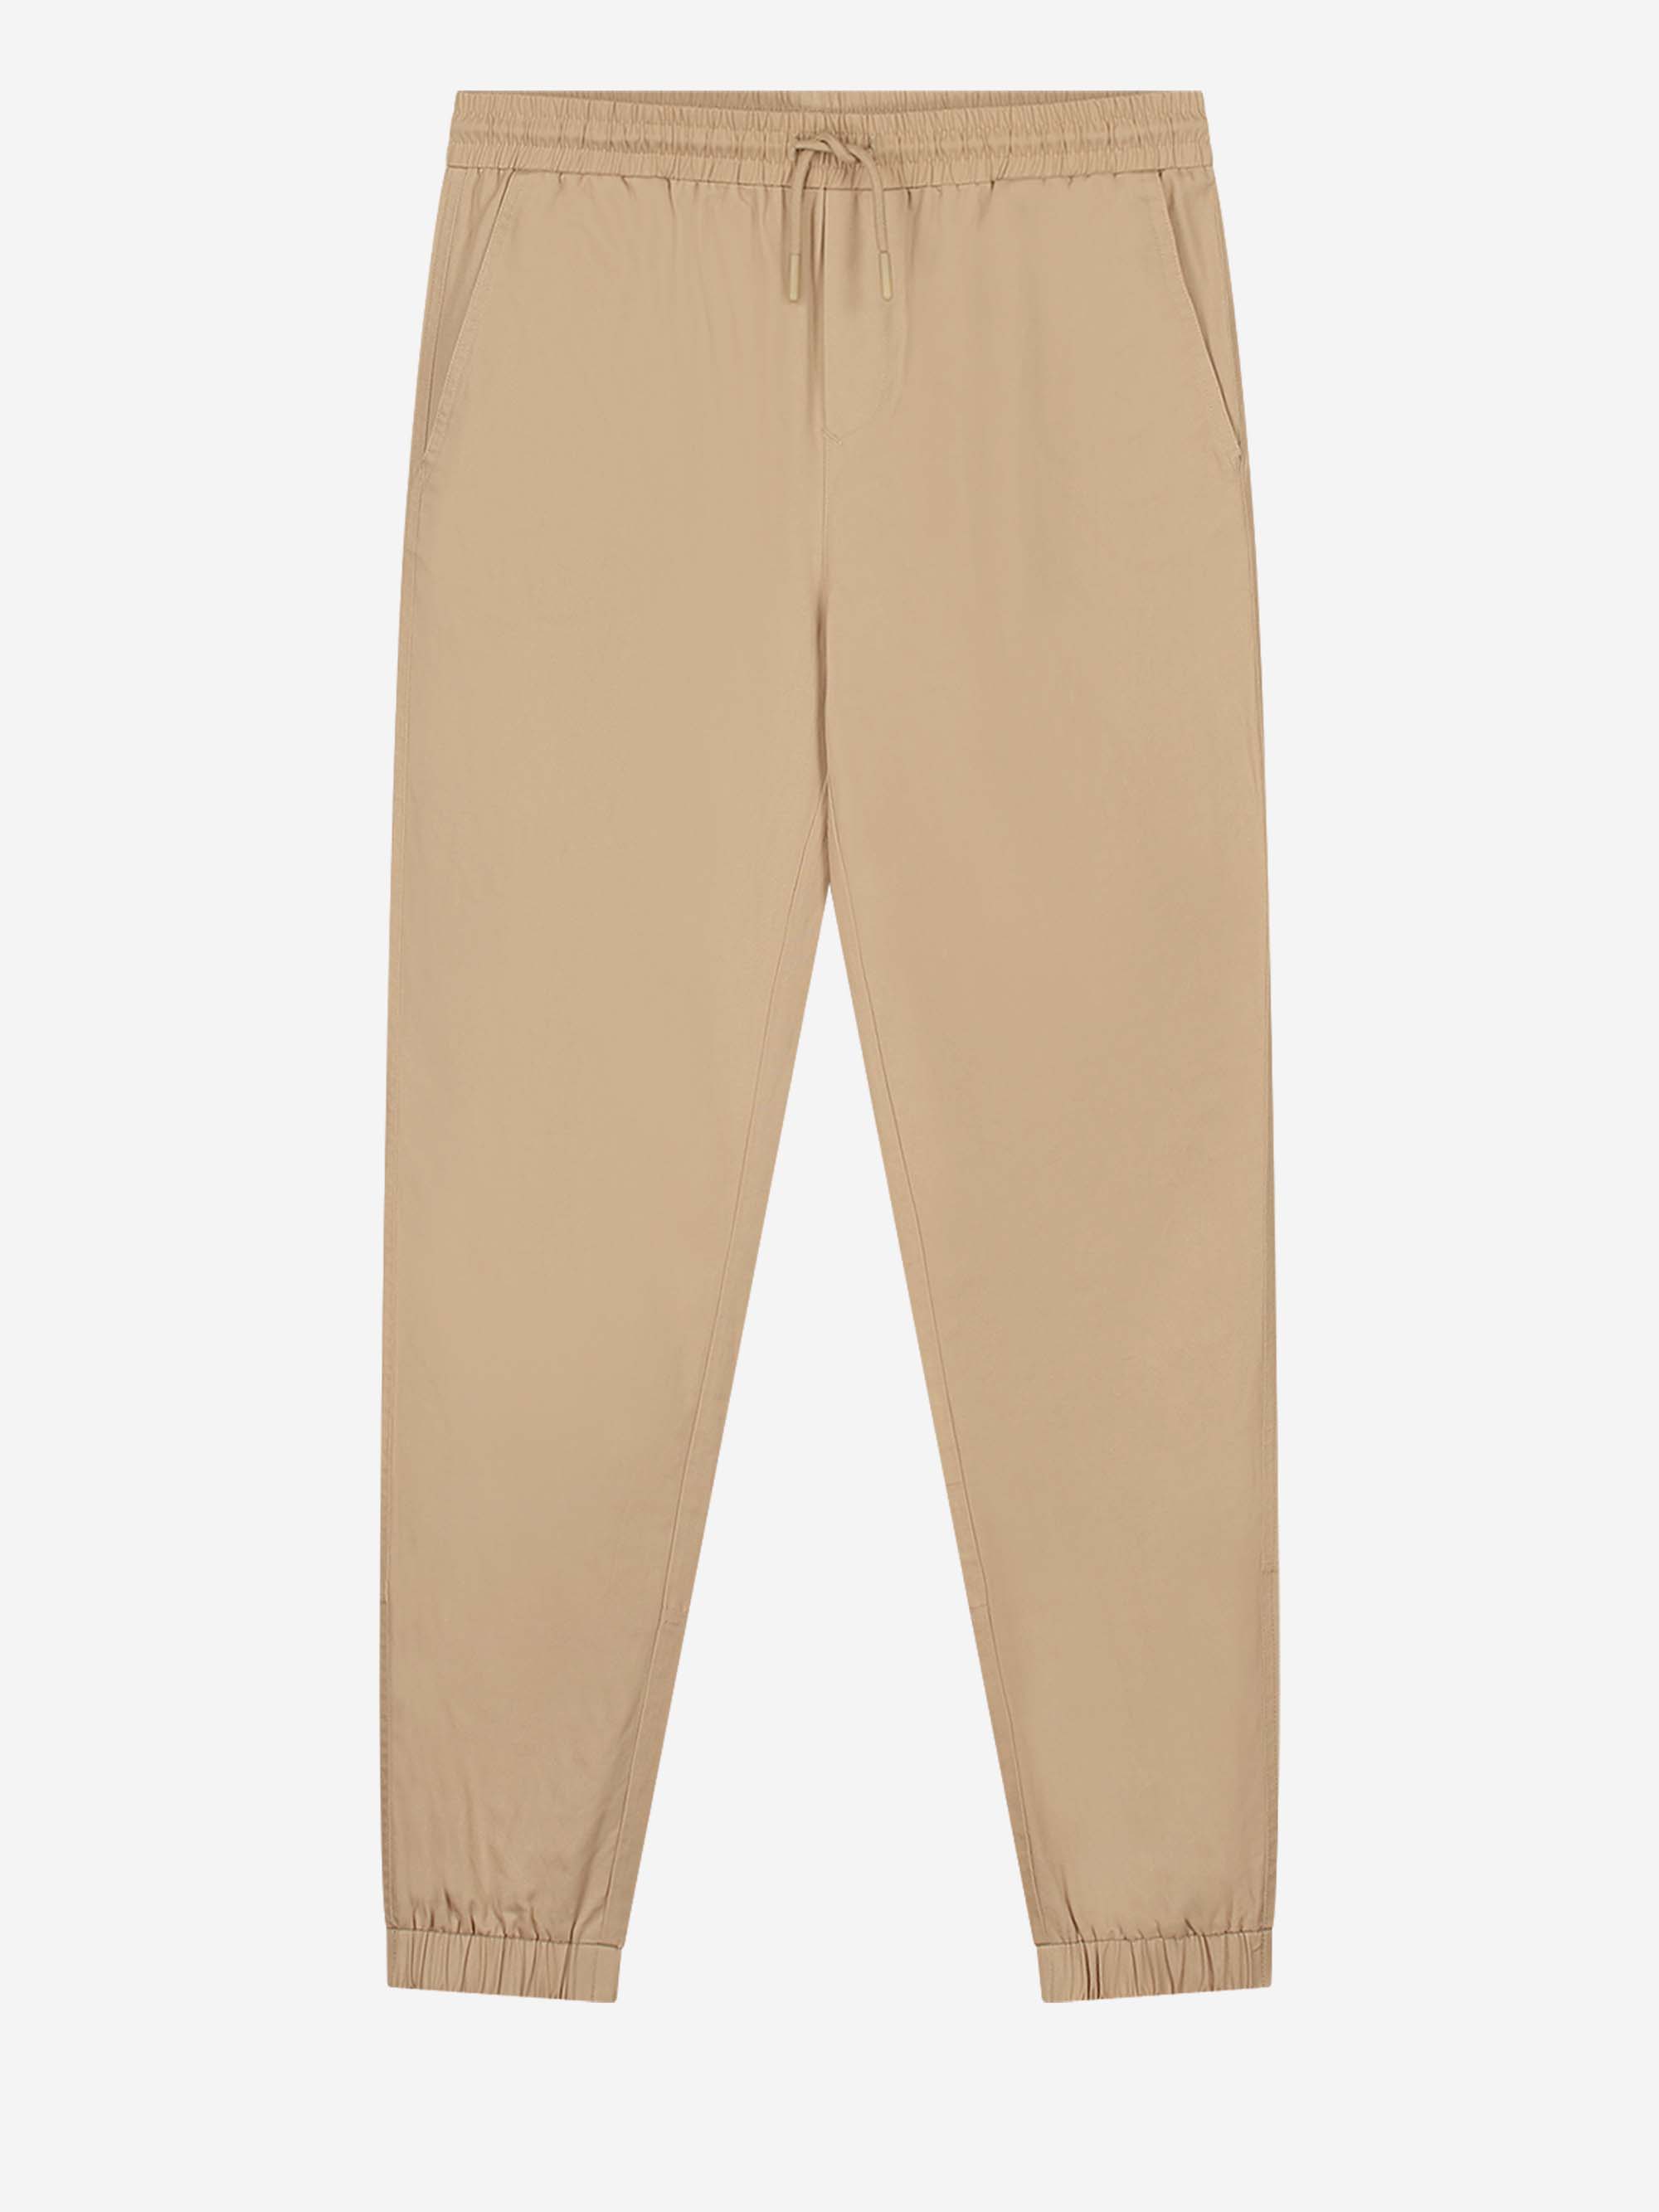 LOOSE FITTED PANTS WITH ELATIC WAISTBAND AND TROUSER LEGS